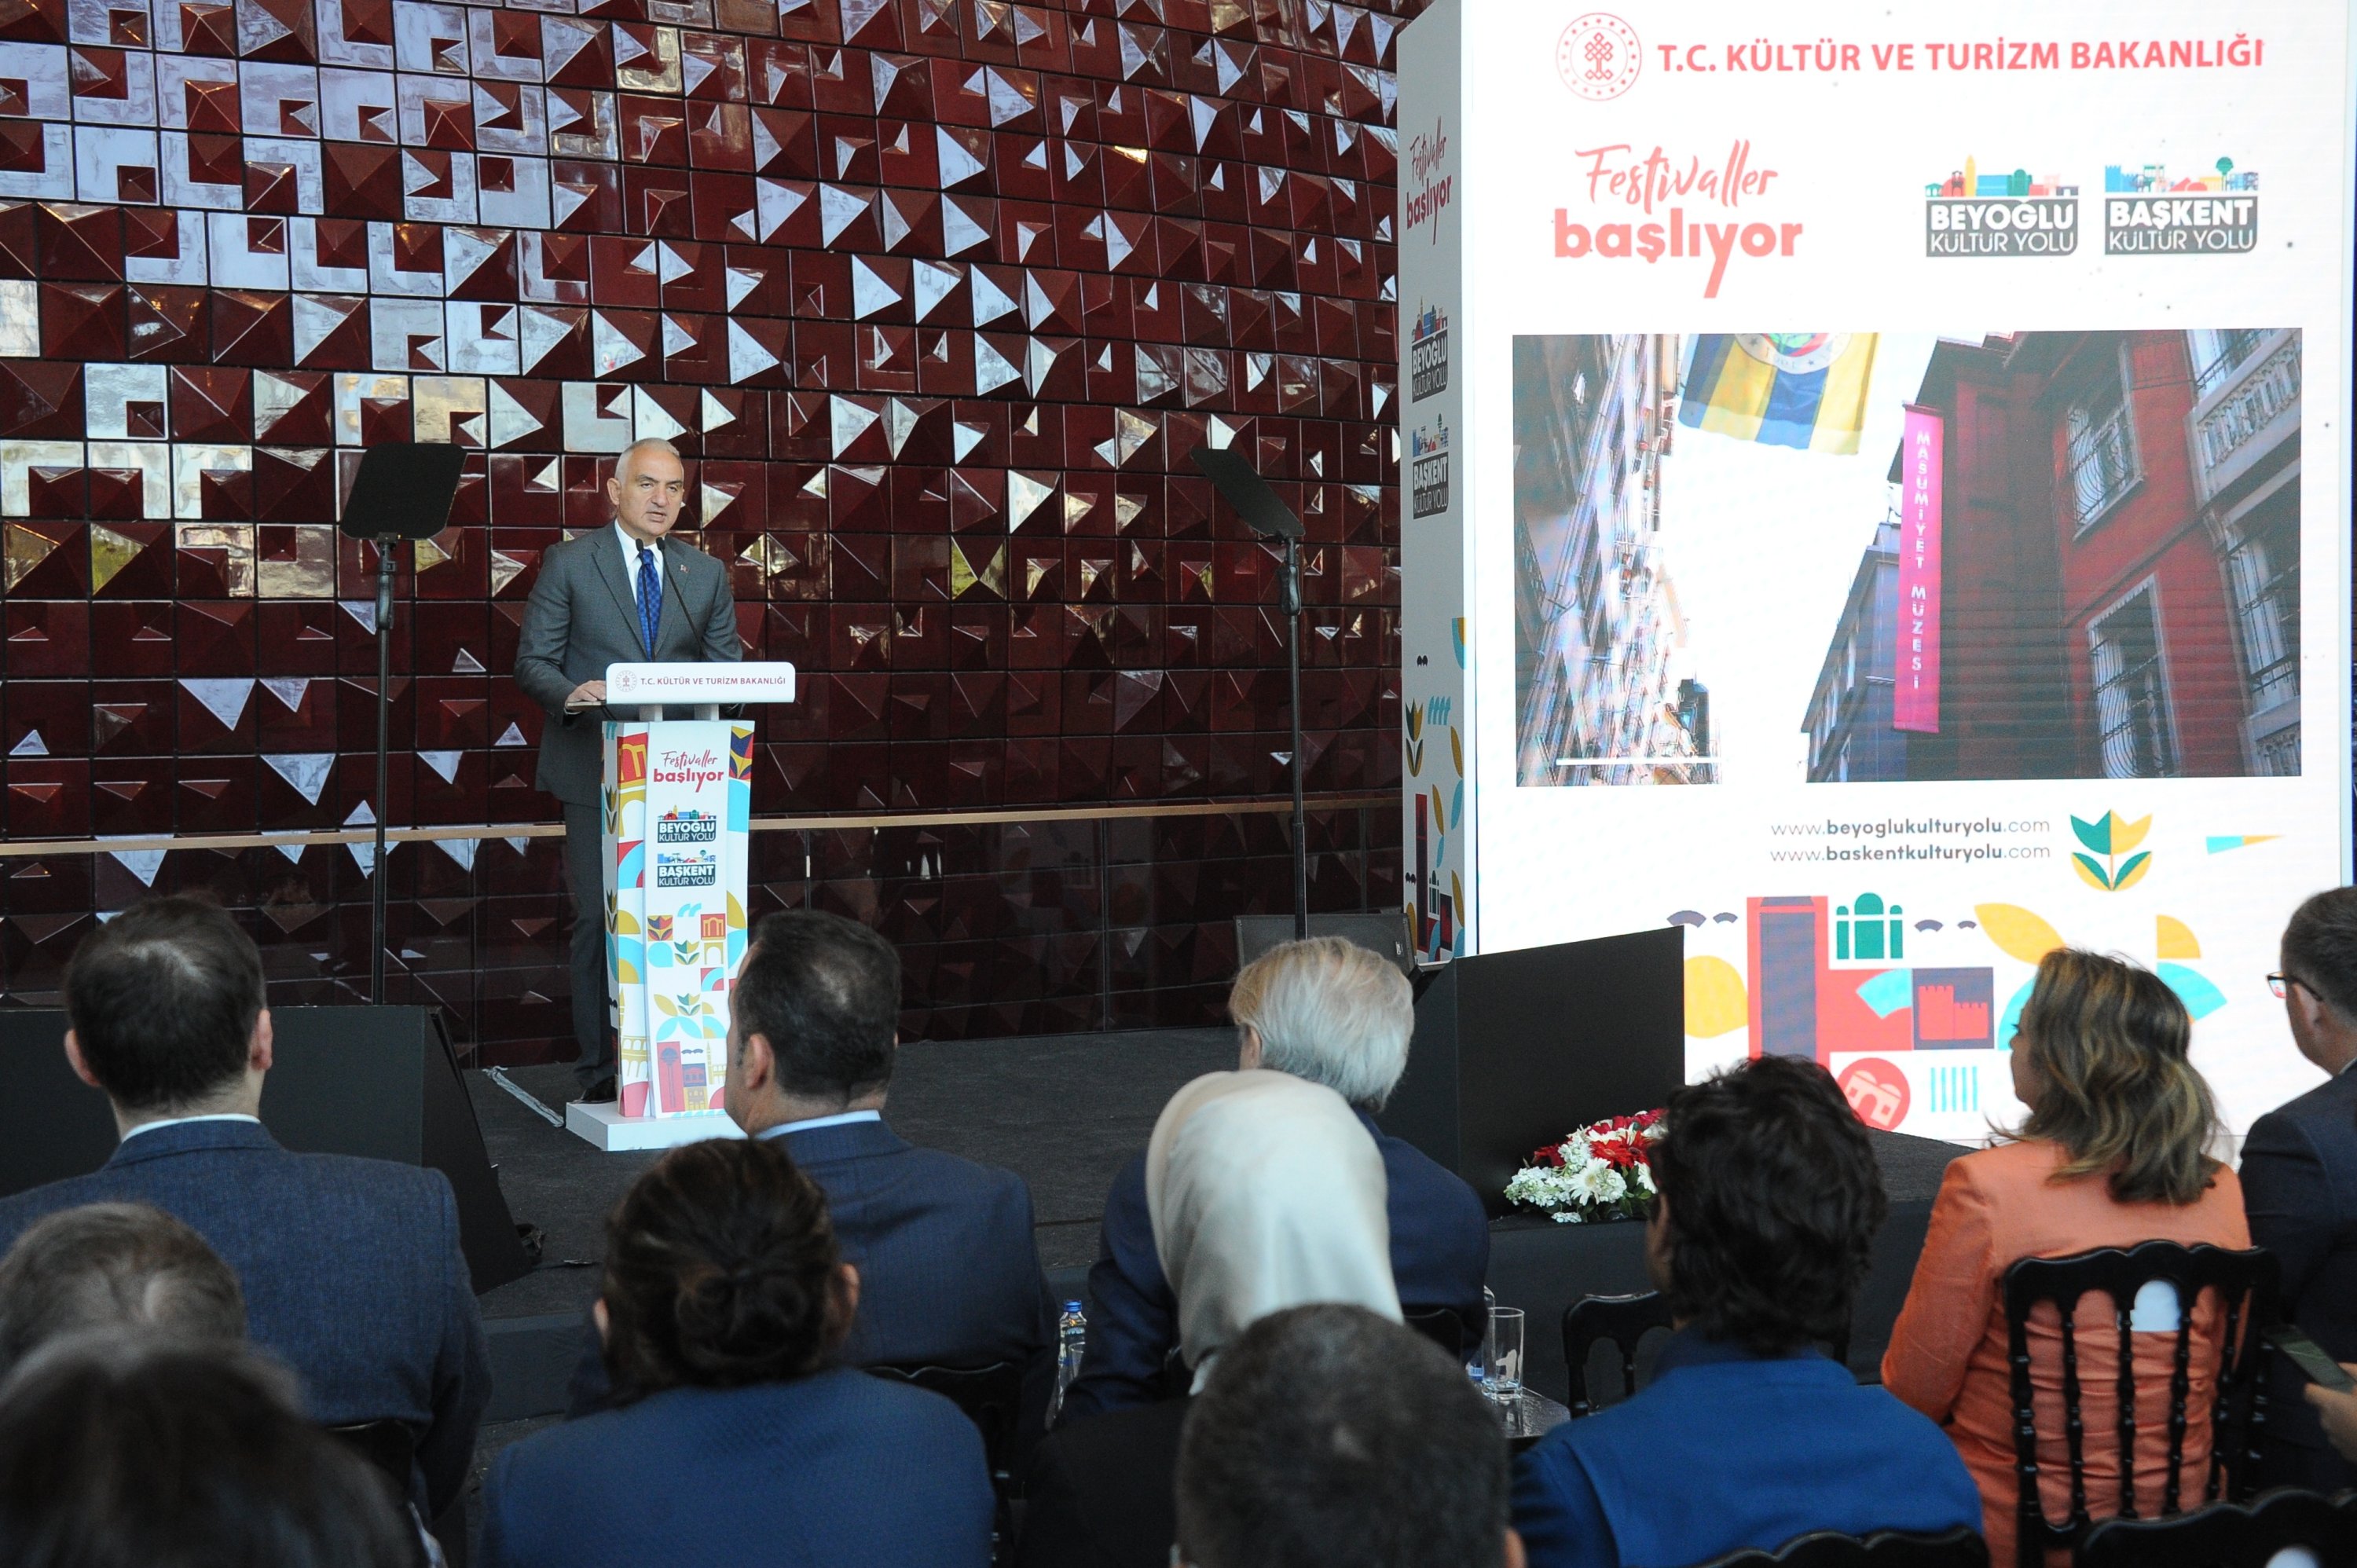 Minister of Culture and Tourism Mehmet Nuri Ersoy speaks at the introductory meeting of the Beyoğlu and Başkent Culture Road Festivals, AKM, Istanbul, May 12, 2022. 